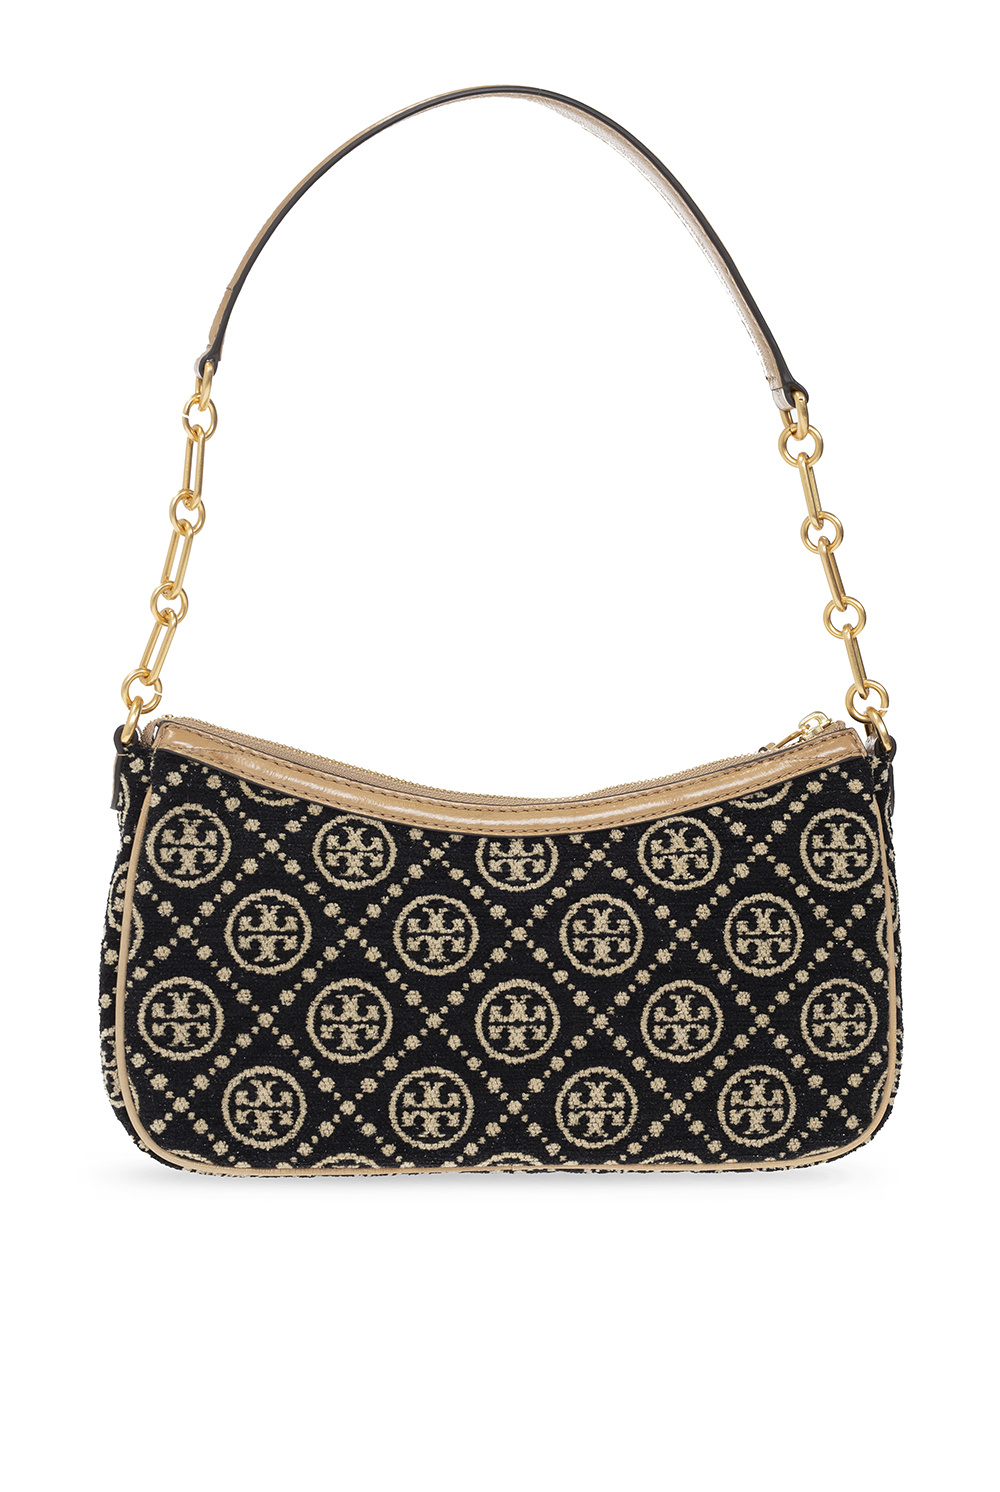 Tory Burch - Introducing our new Tory Sport collaboration with